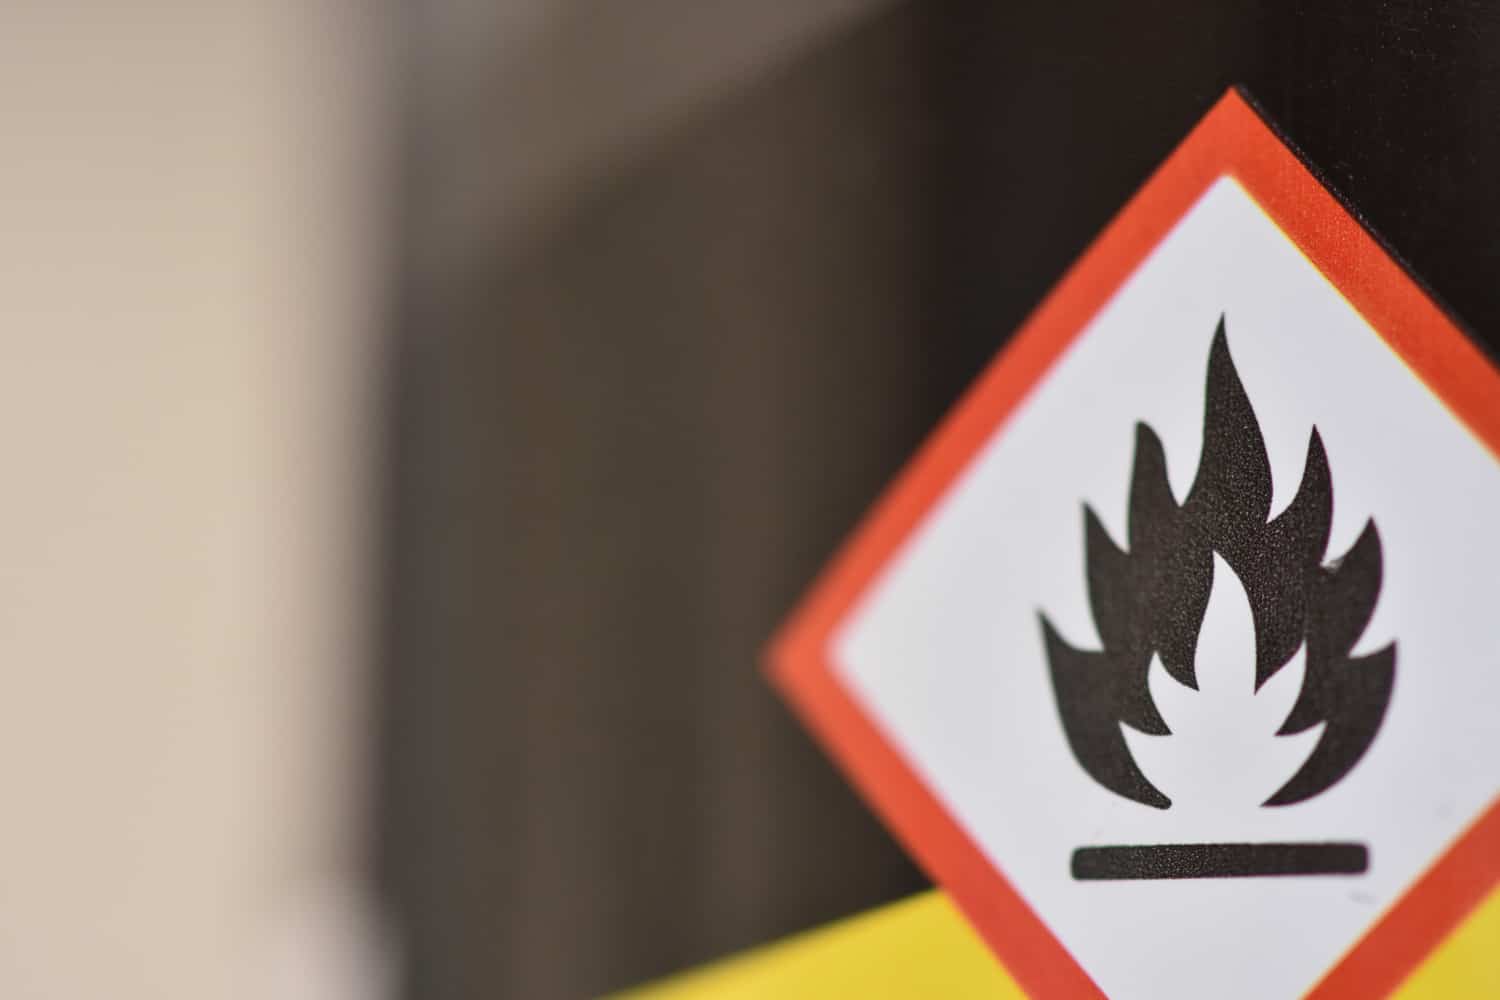 A sign - flammable